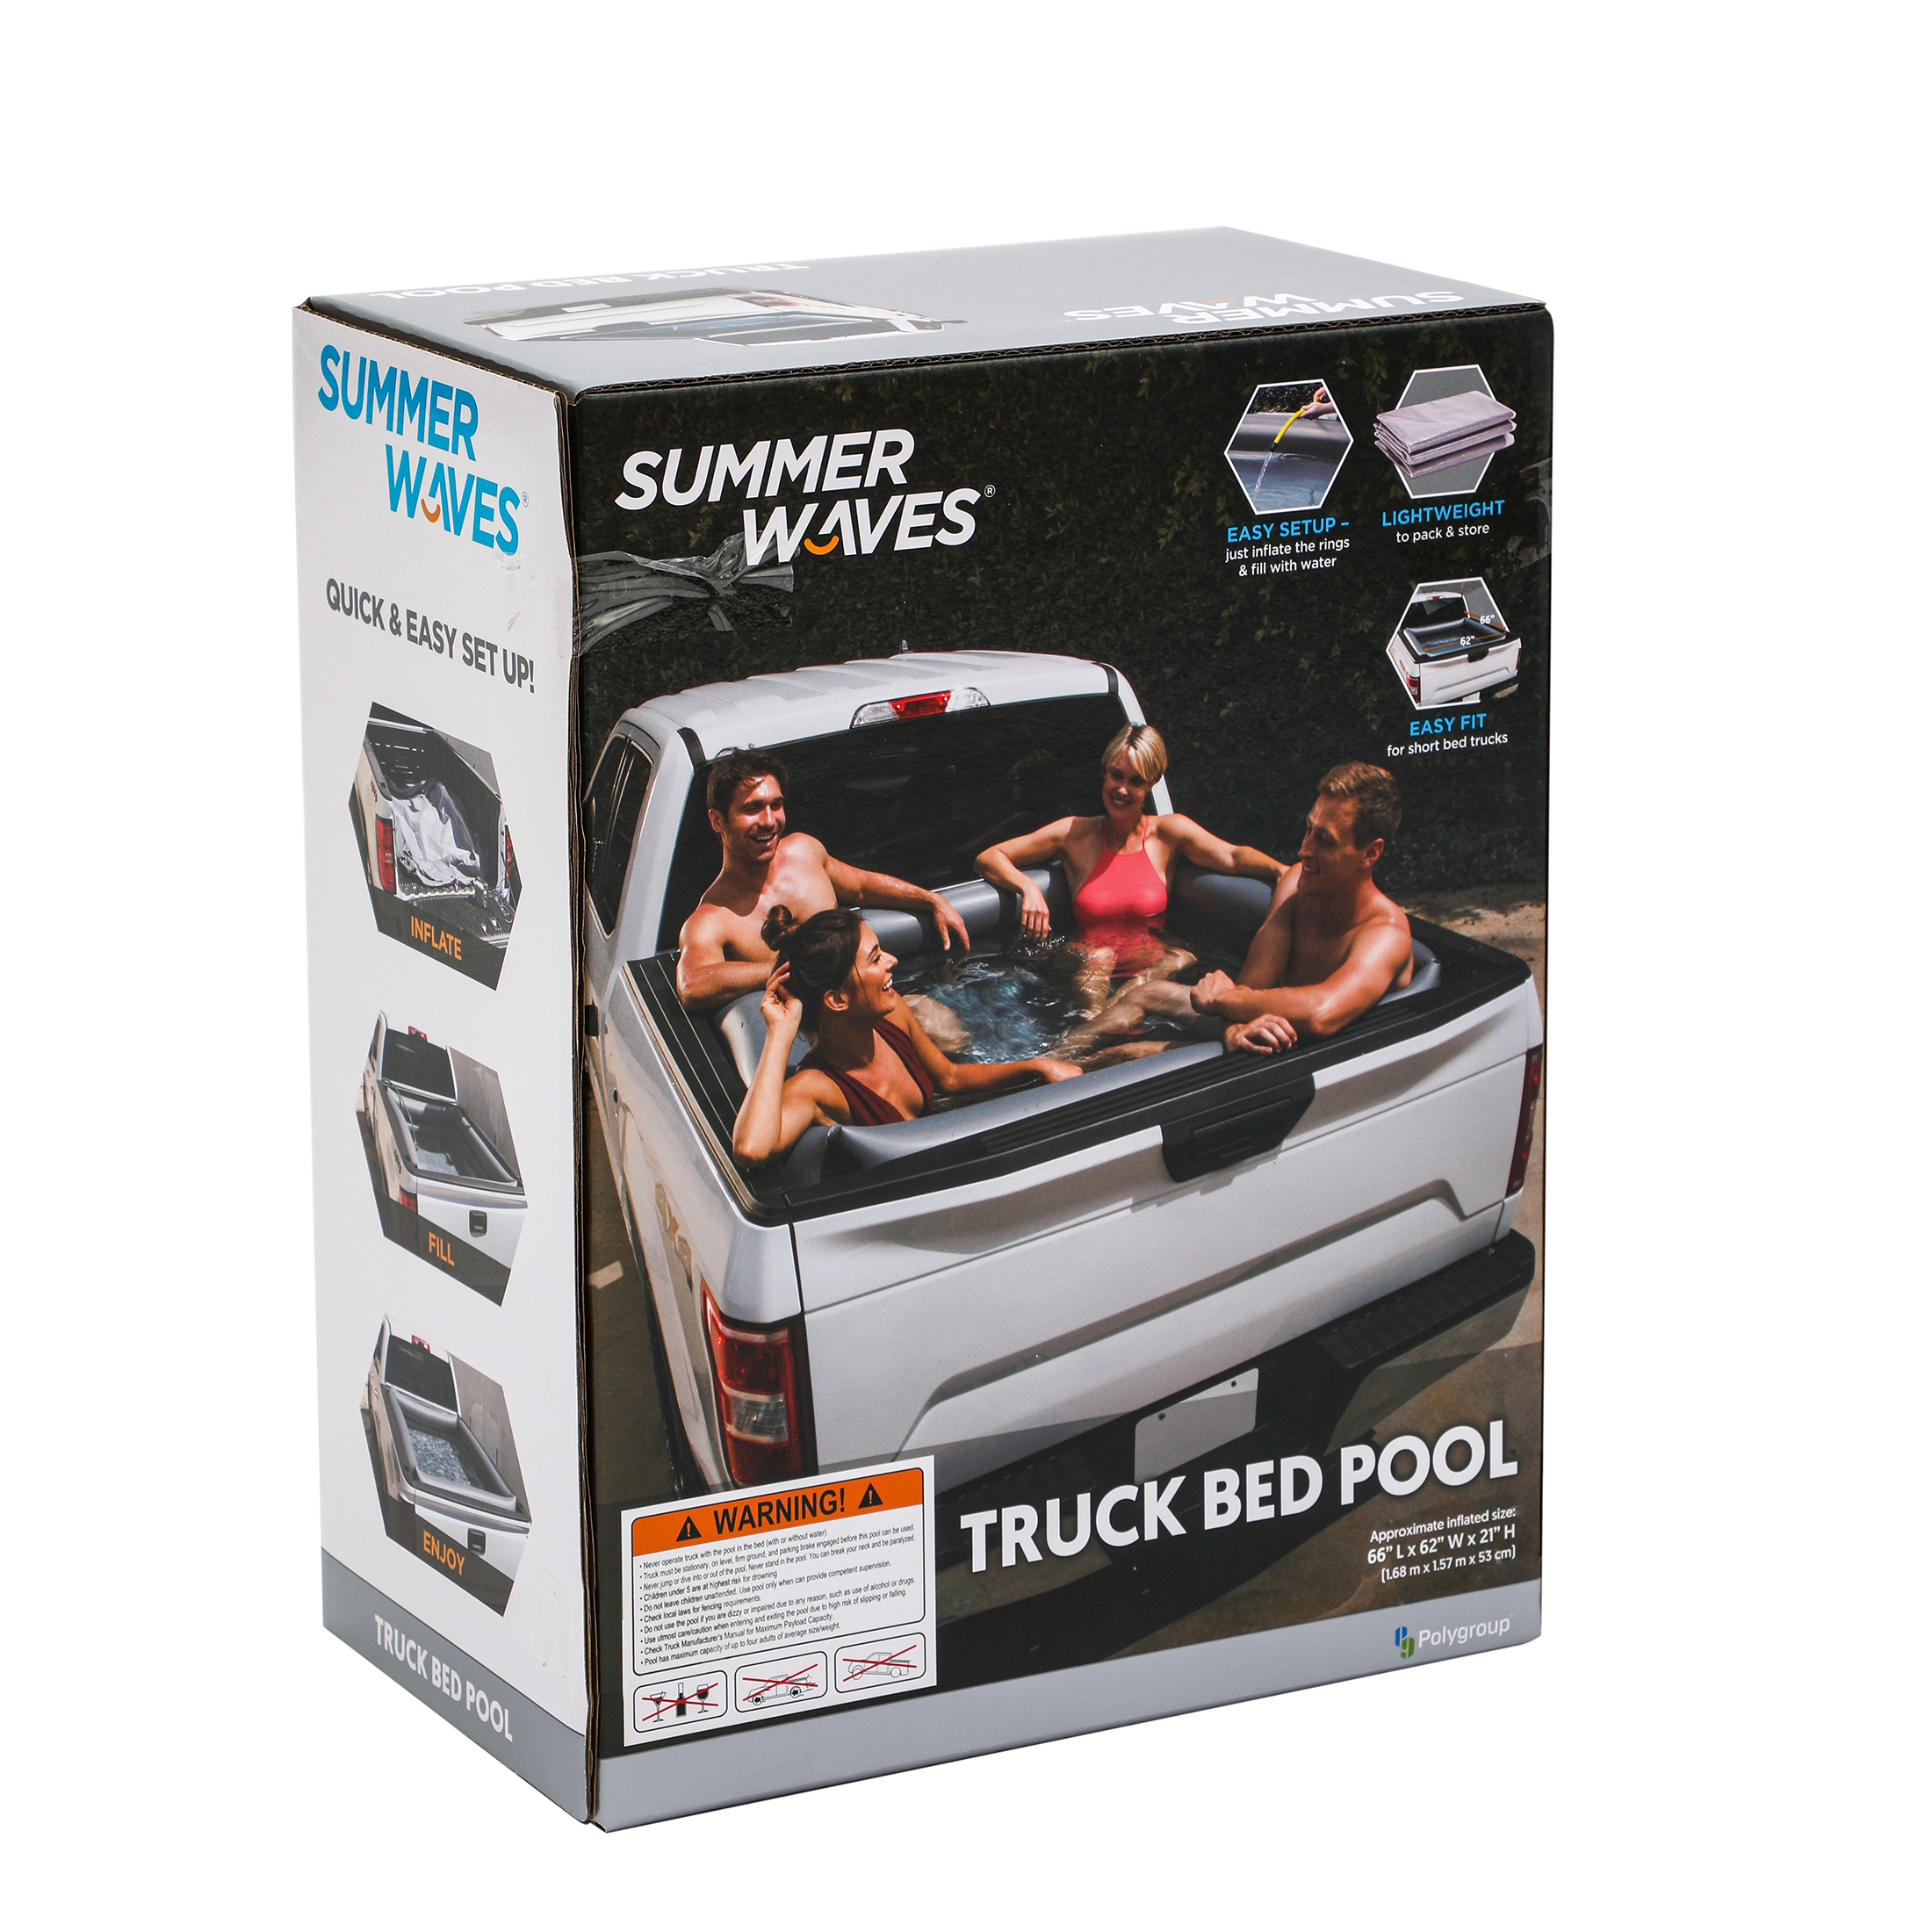 Summer Waves Rectangular Inflatable Truck Bed Pool, Gray, Adults, Unisex - image 7 of 7